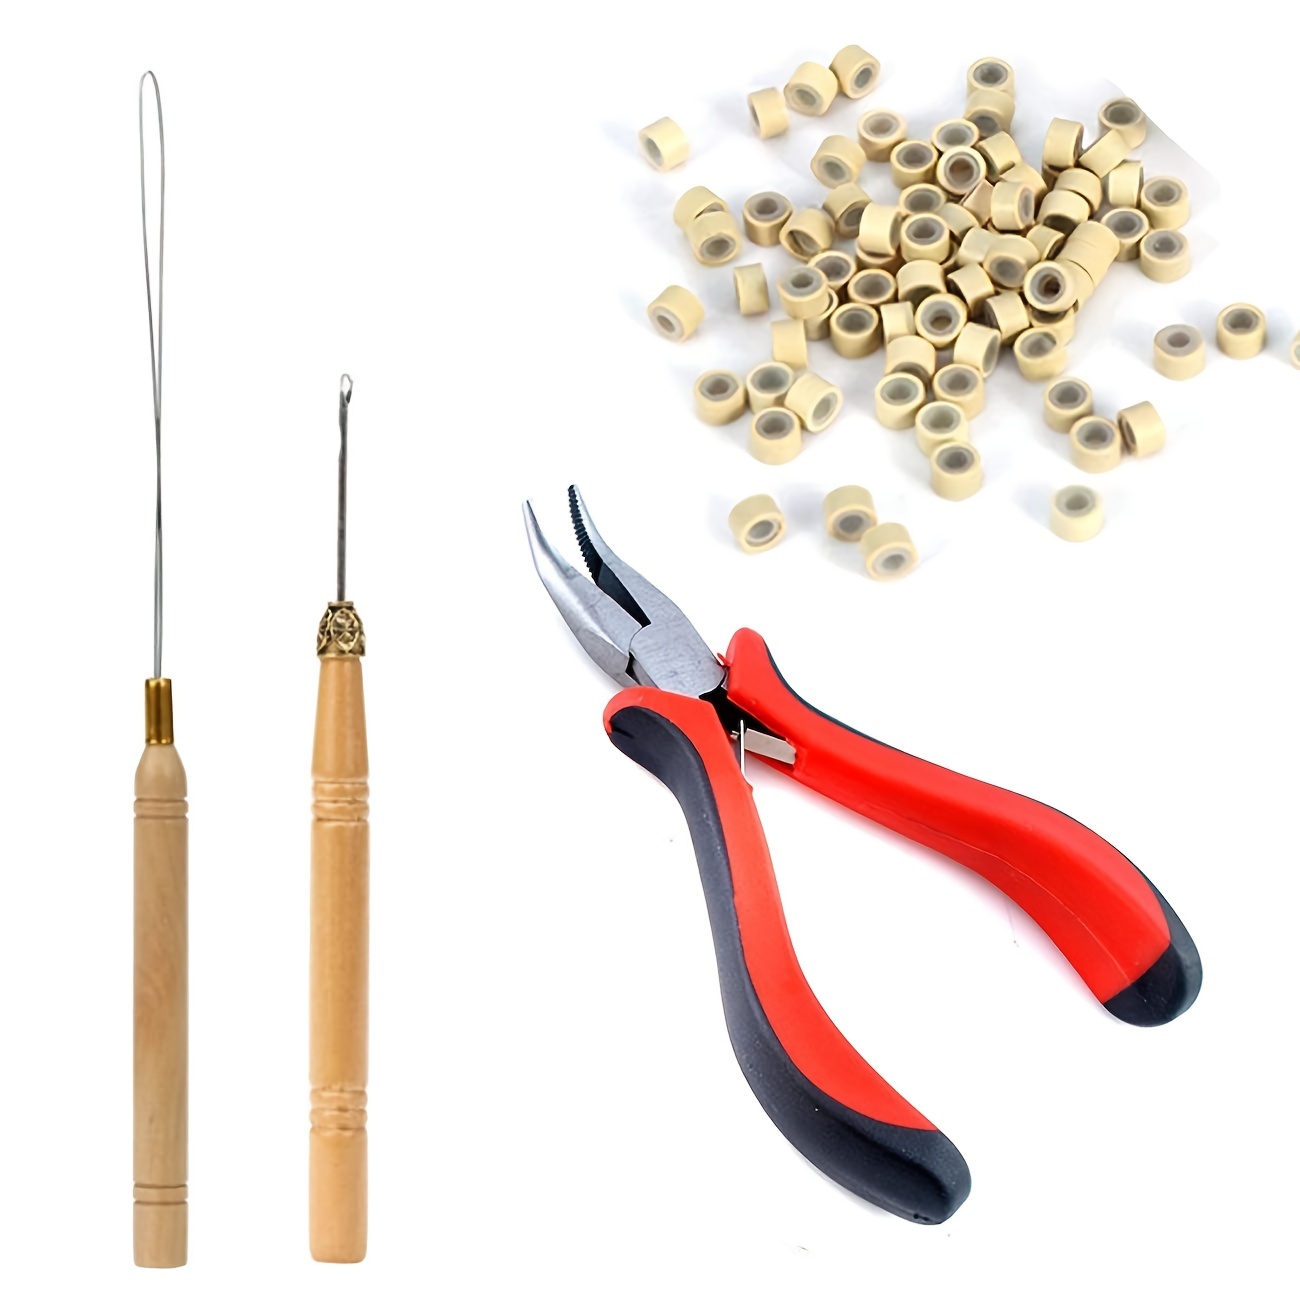 200 Silicone MICRO Rings BEADS Hair Extension Tools KIT-  Pliers,Loop,Hook.I-Tip - Simpson Advanced Chiropractic & Medical Center